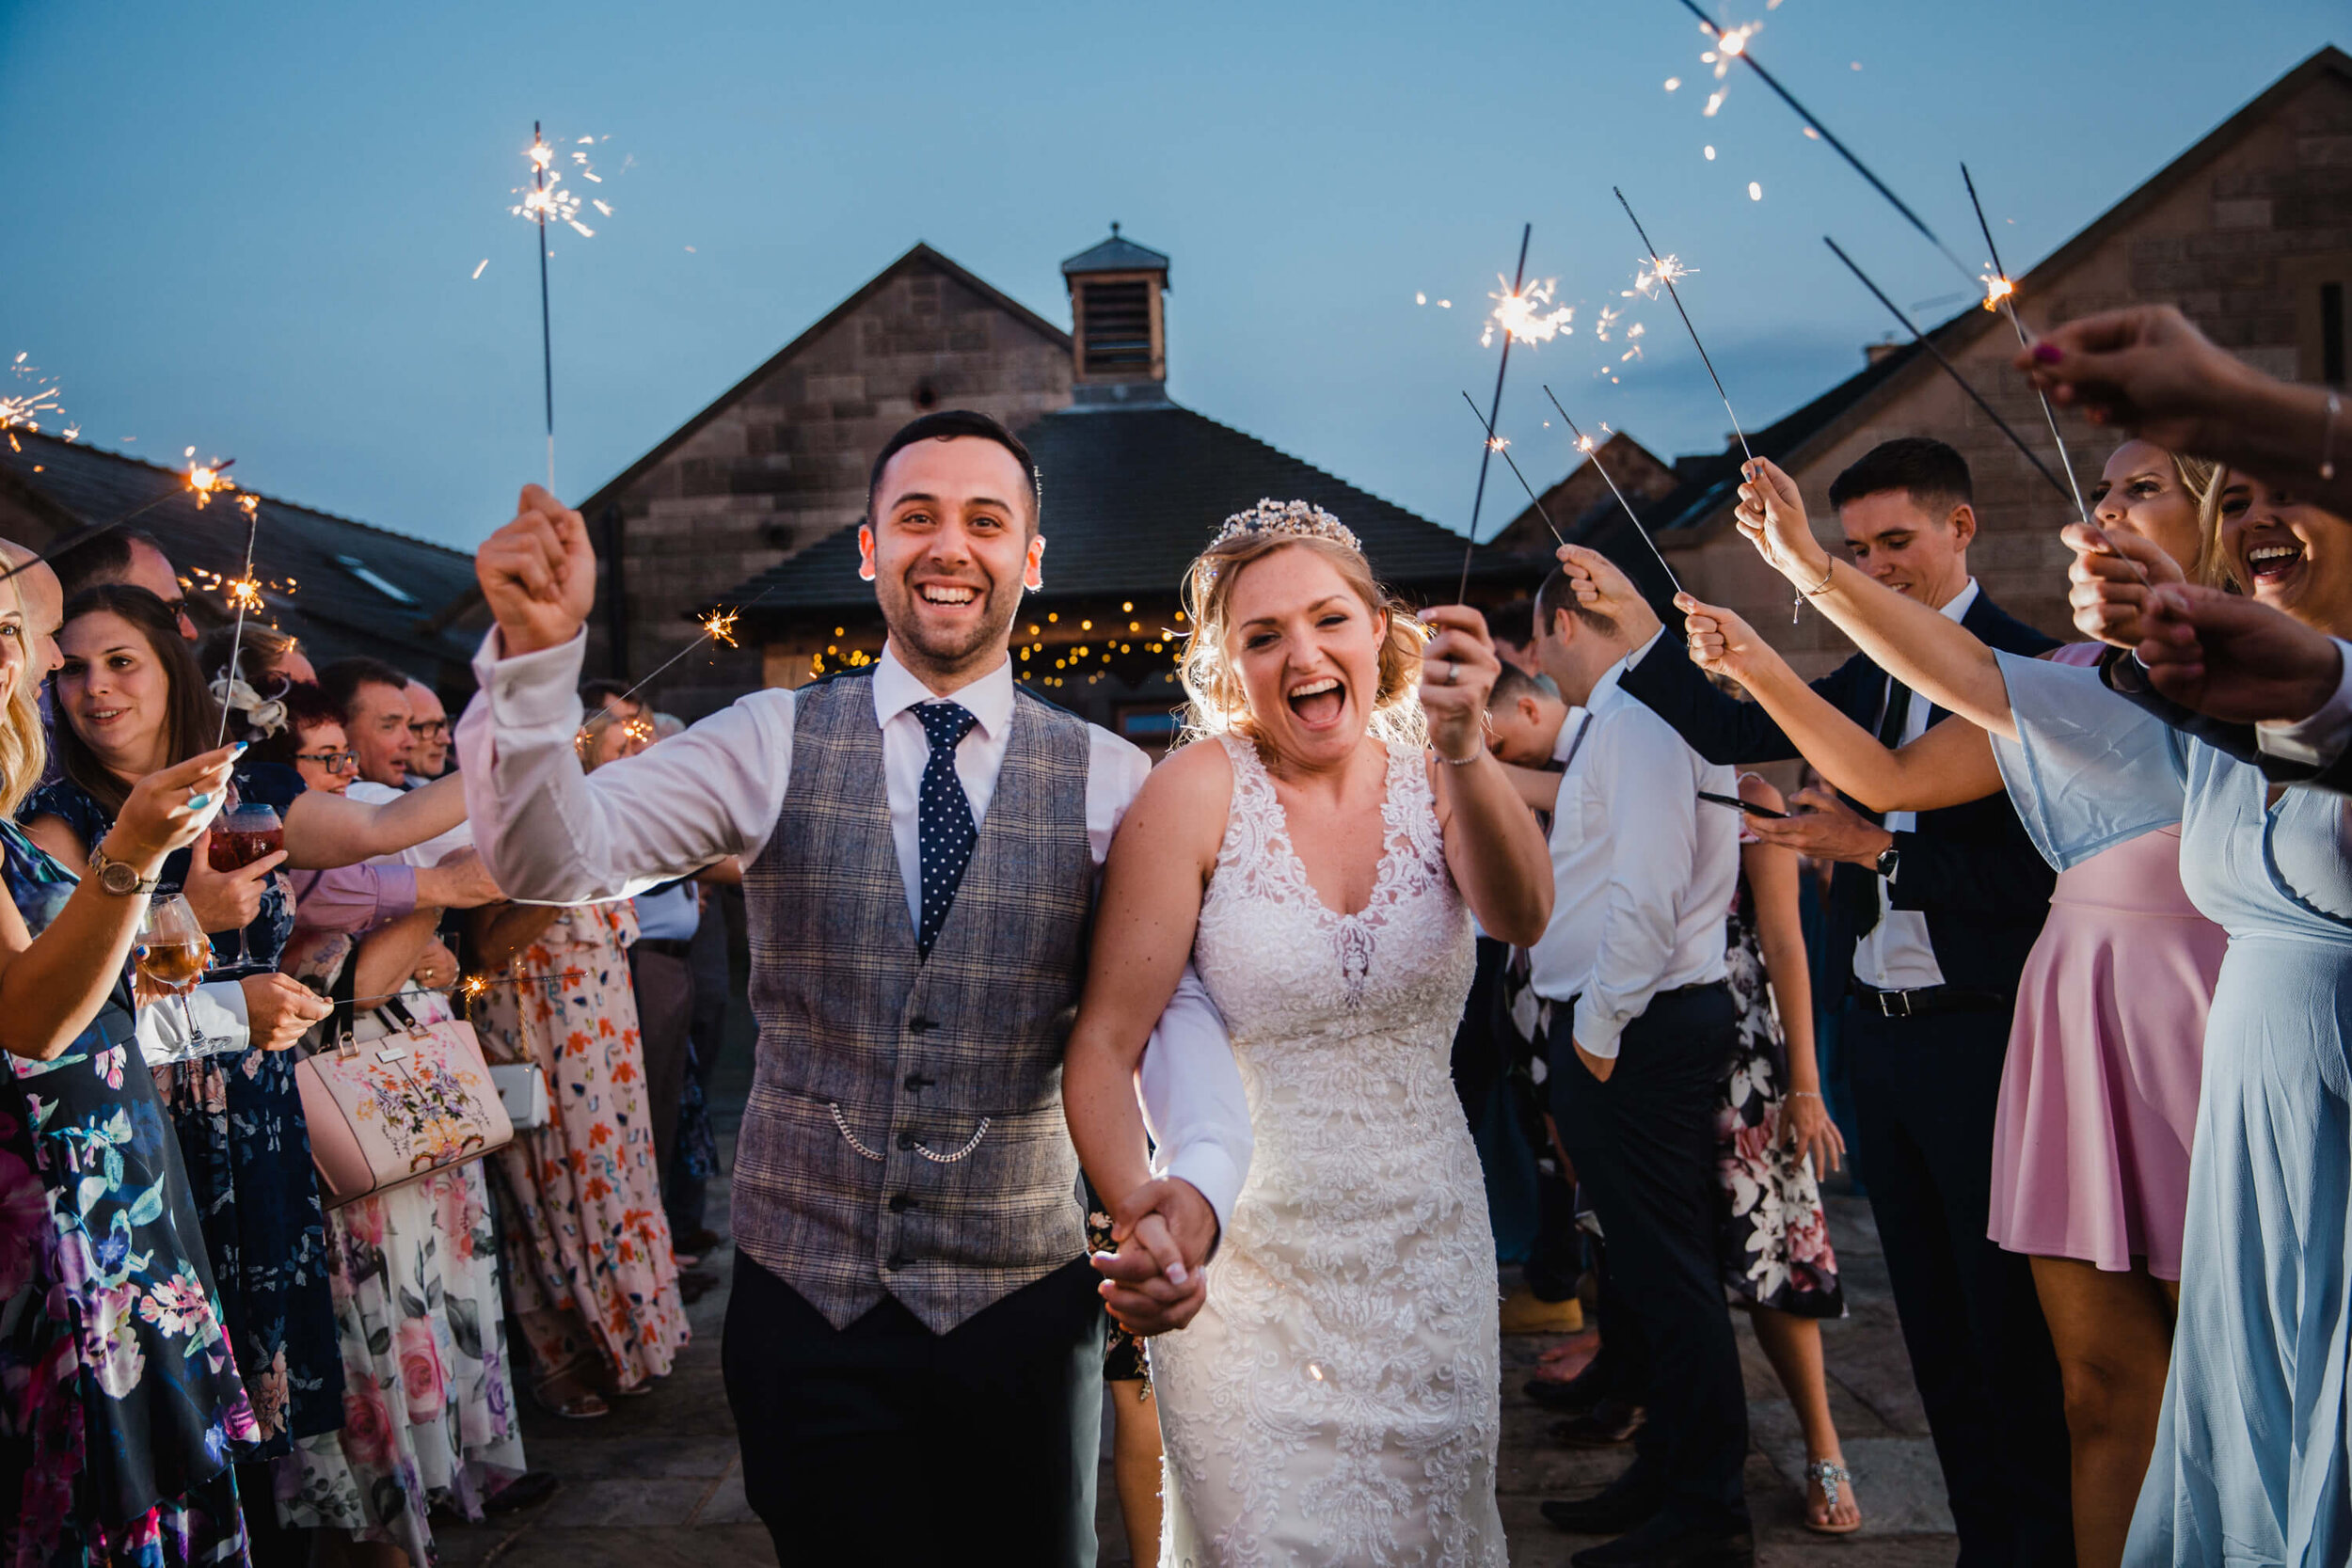 newlyweds enjoy sparkler exit on field surrounded by friends and family